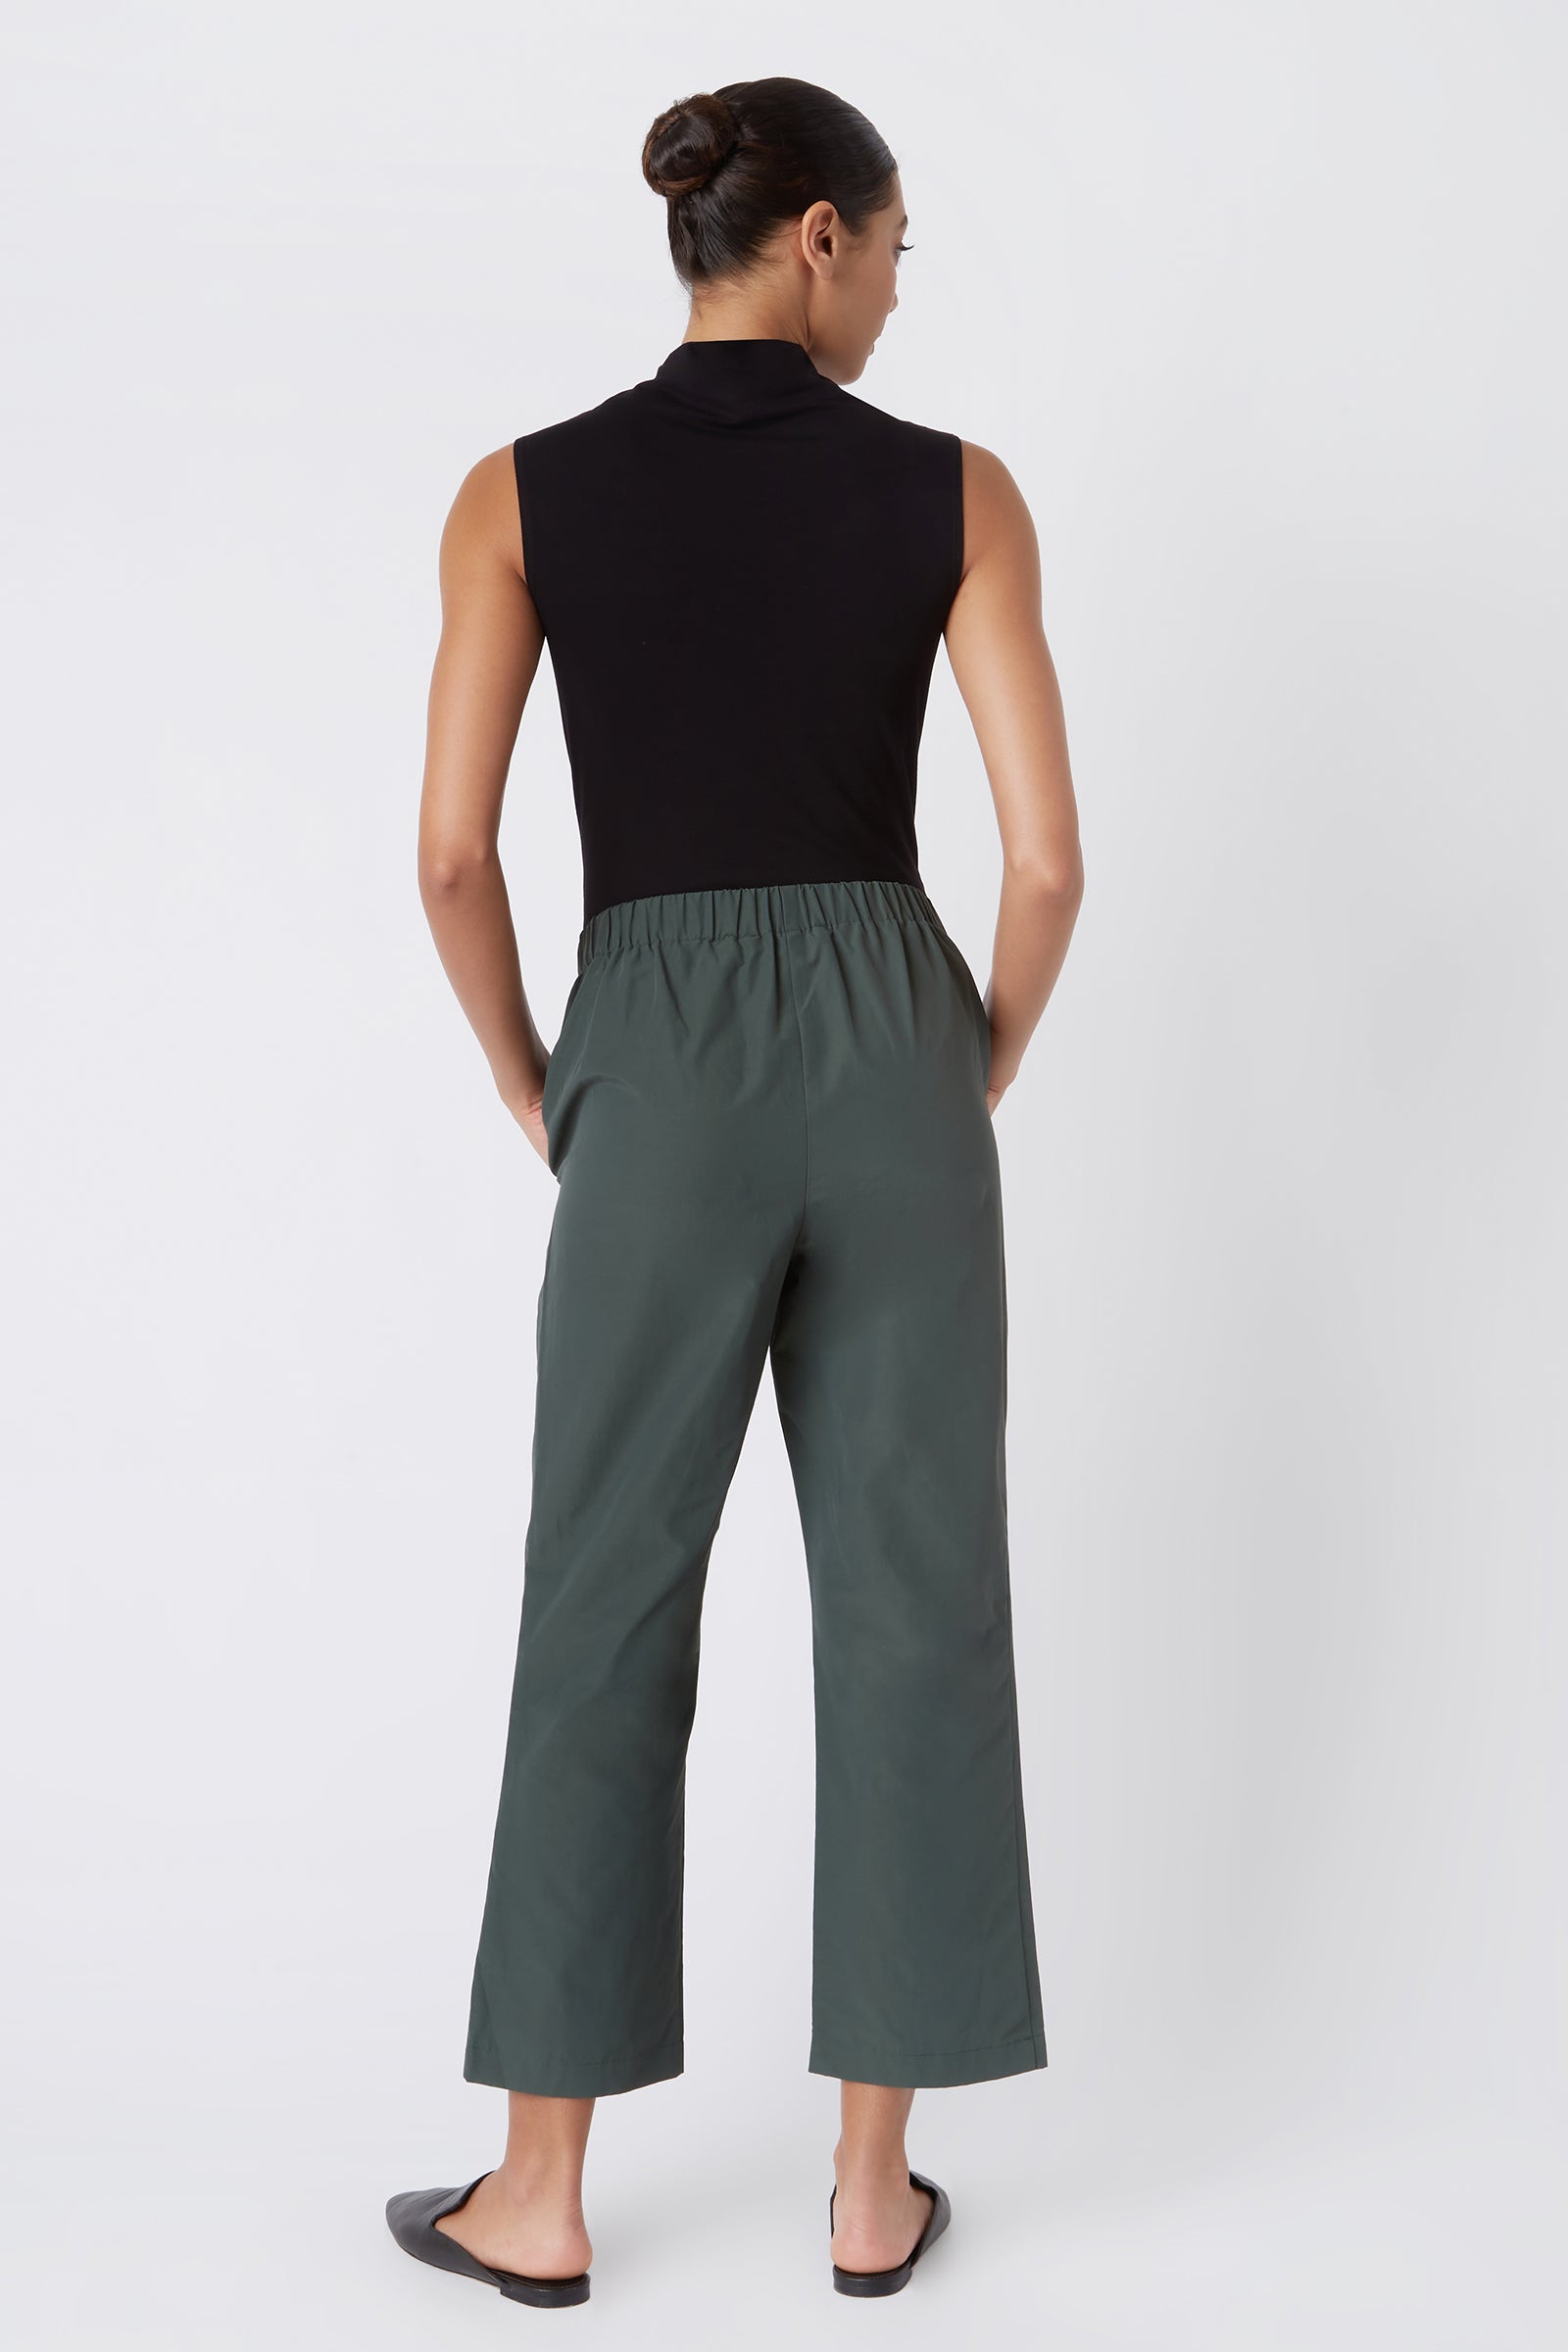 Kal Rieman Brit Crop Pant in Loden on Model with Hands in Pockets Full Front Side View